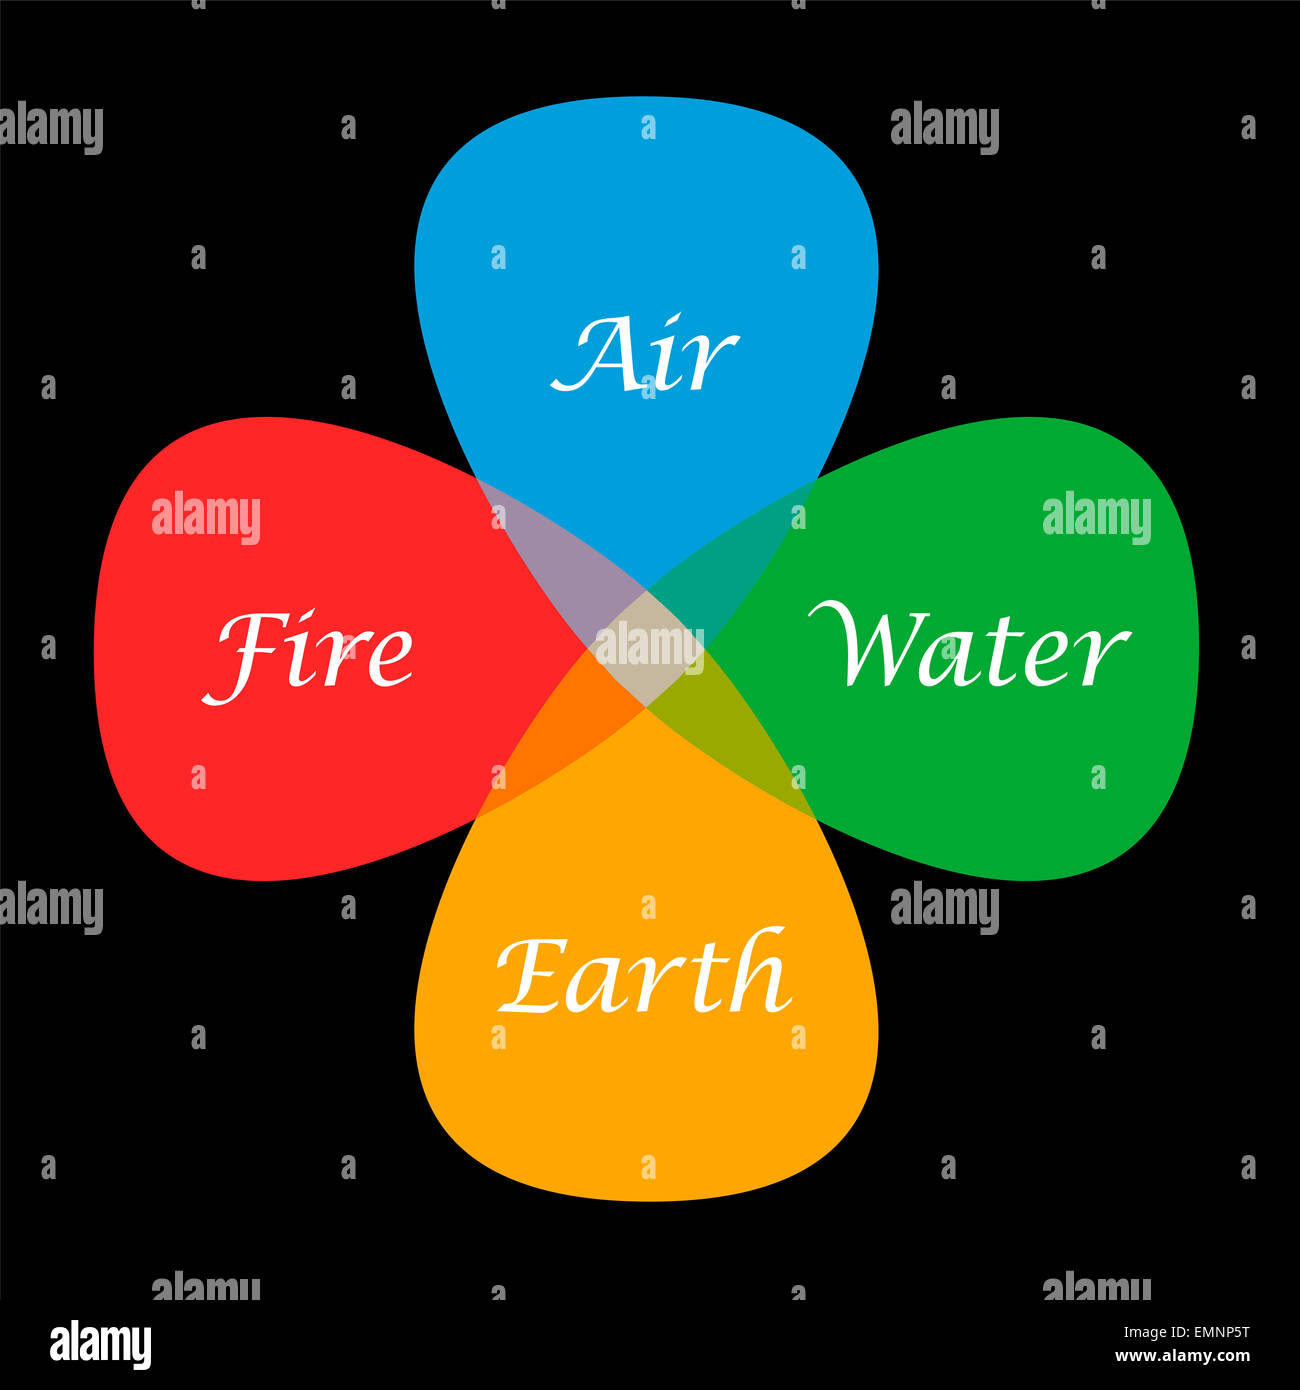 The Four Elements Fire Air Water And Earth In Their Corresponding